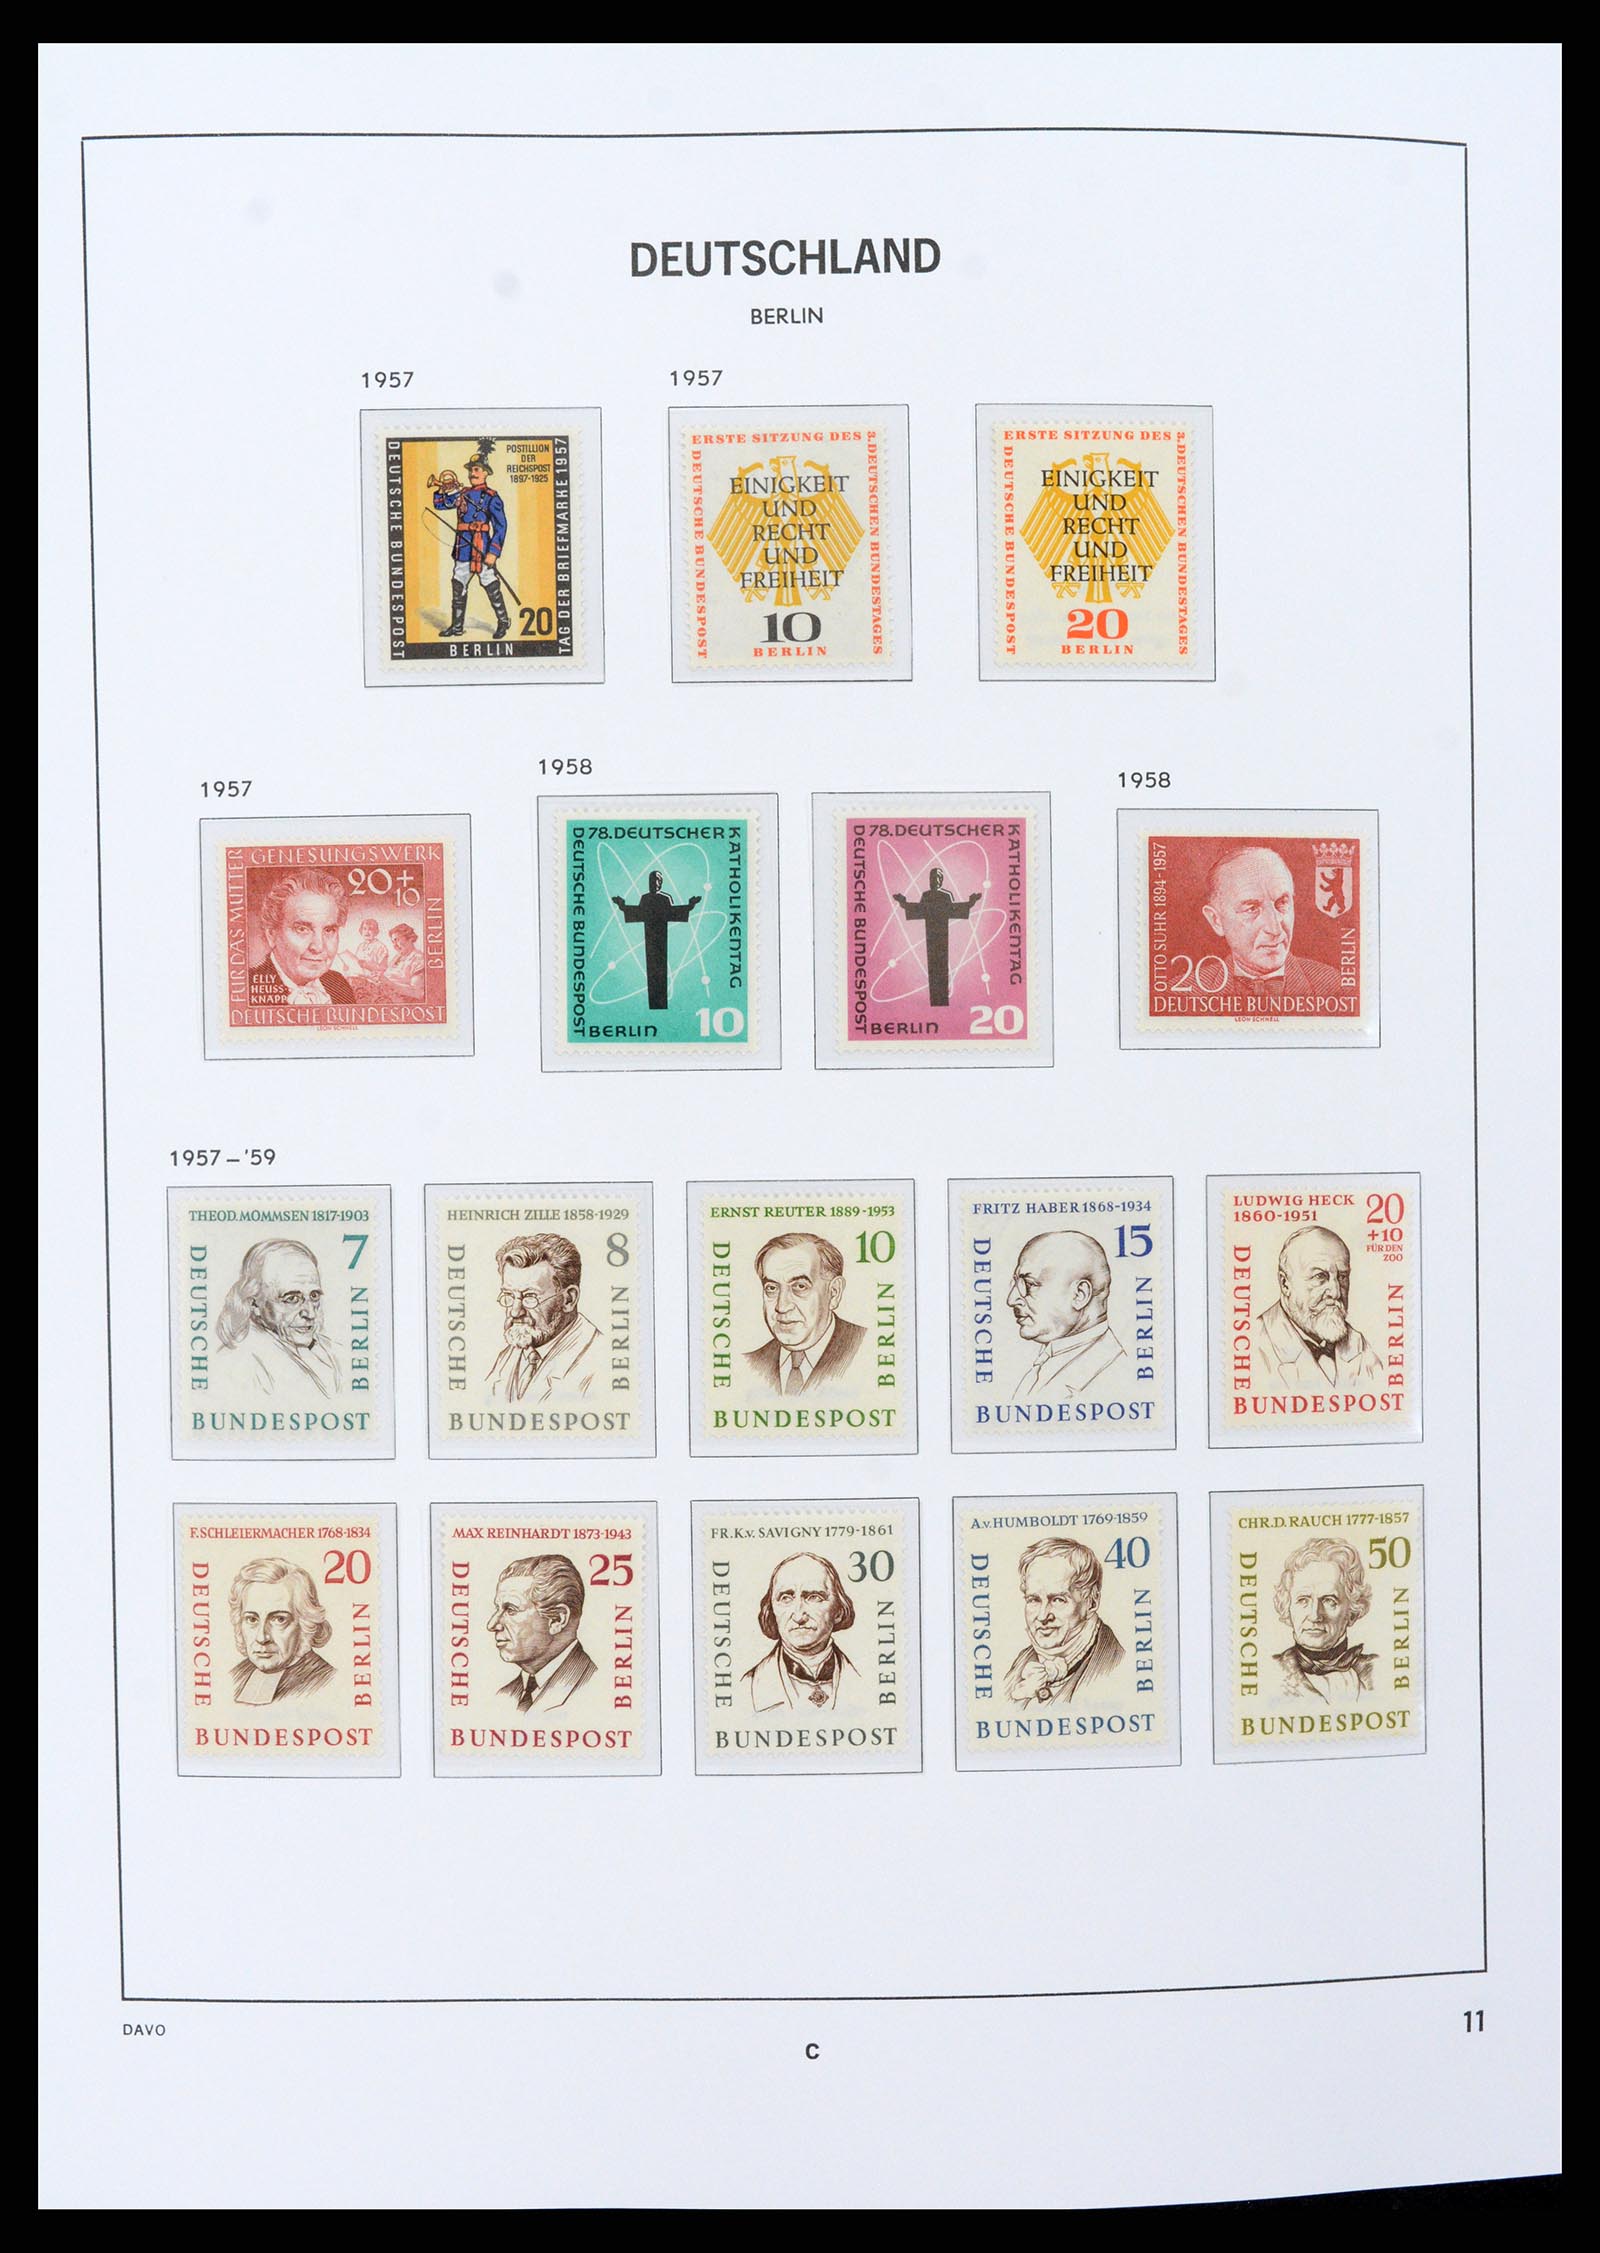 37504 011 - Stamp collection 37504 Berlin 1948-1990.